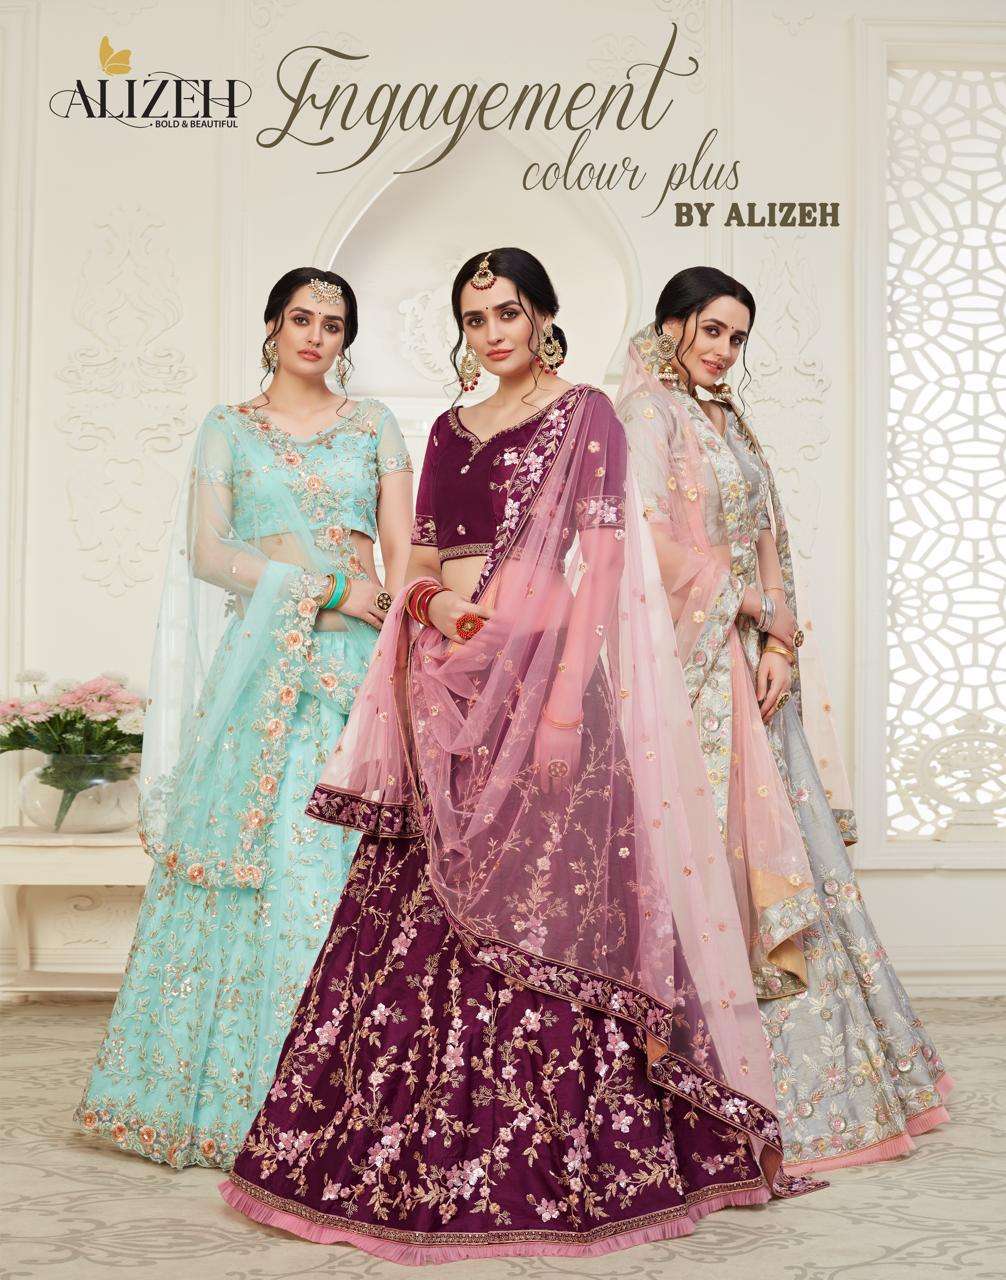 ENGAGEMENT COLOUR PLUS BY ALIZEH DESIGNER BEAUTIFUL NAVRATRI COLLECTION OCCASIONAL WEAR & PARTY WEAR FANCY LEHENGAS AT WHOLESALE PRICE